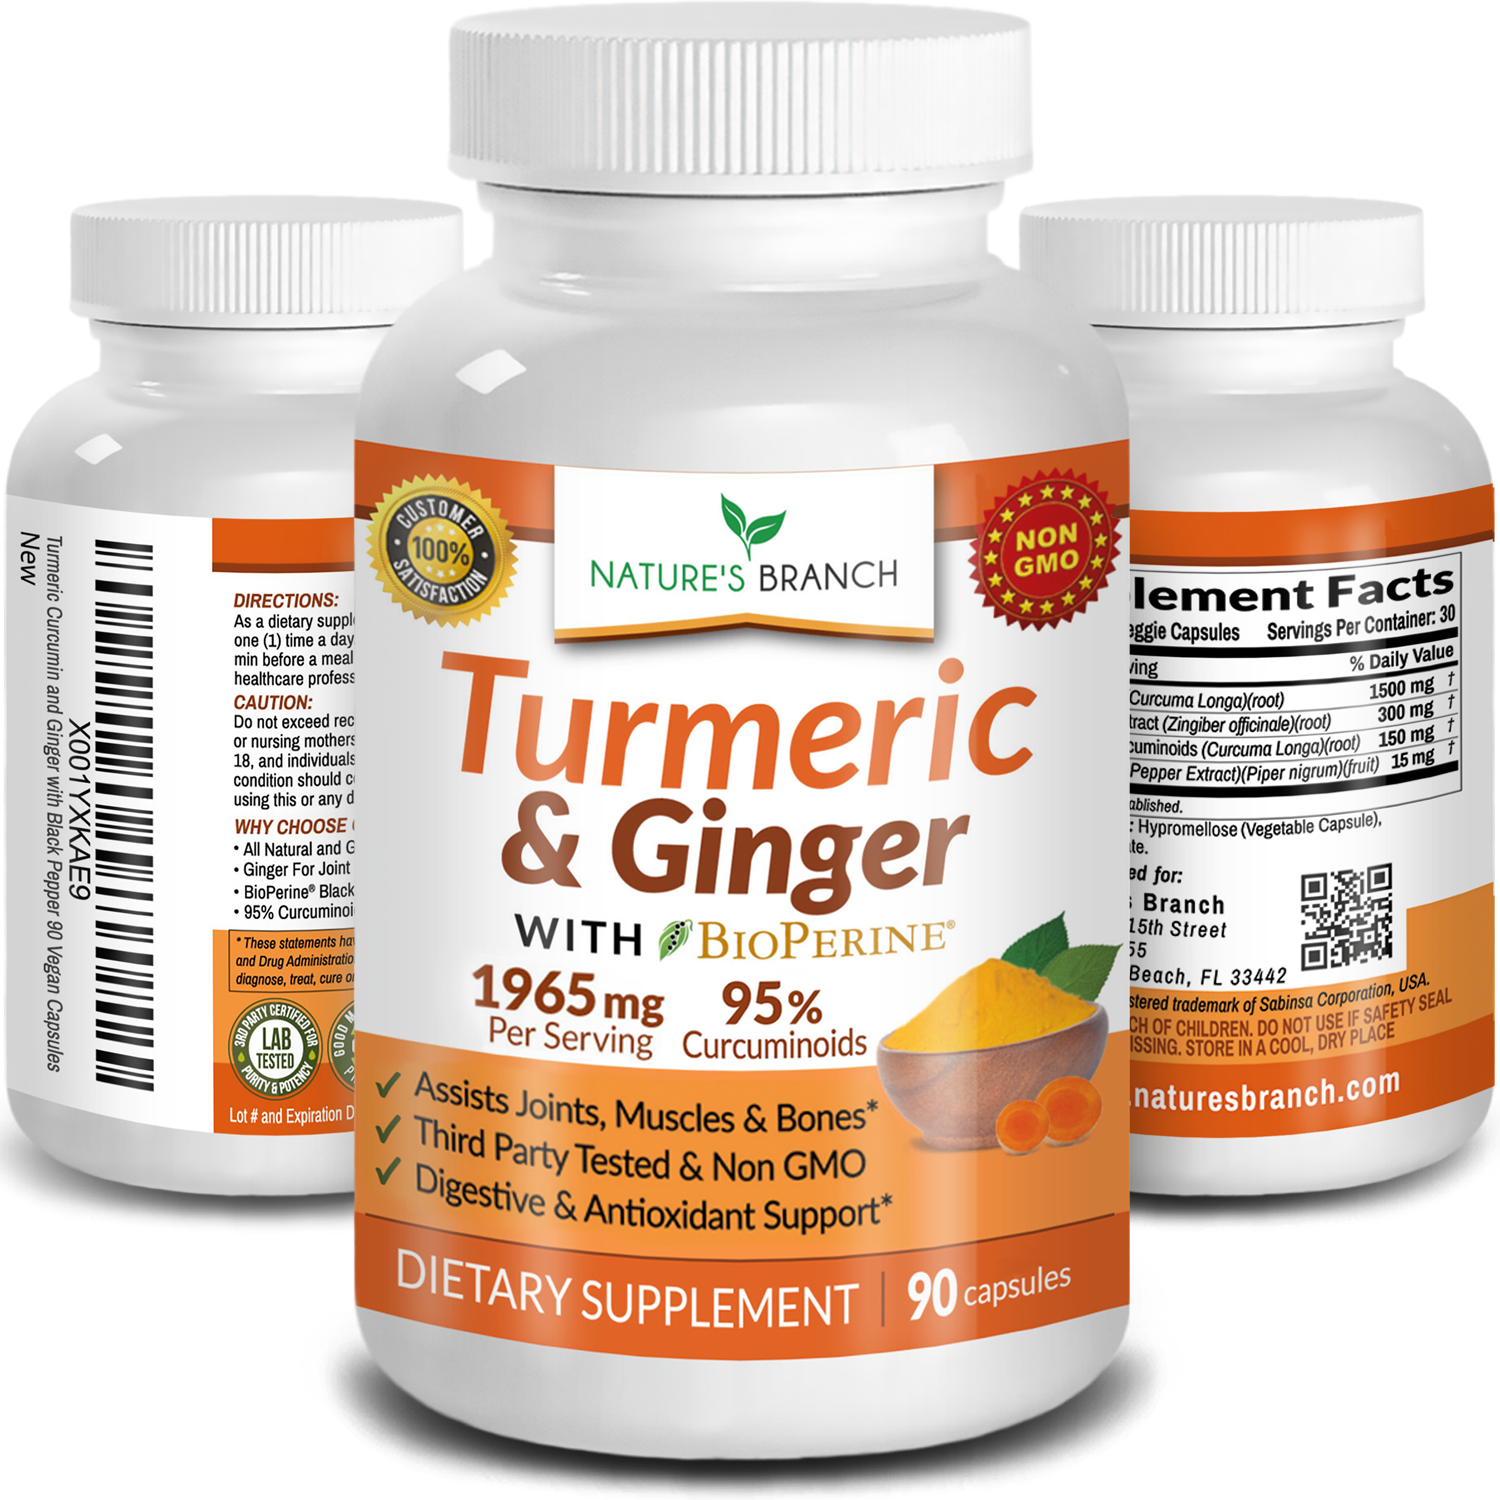 Nature's Branch Turmeric and Ginger with BioPerine supplement bottle for joint support